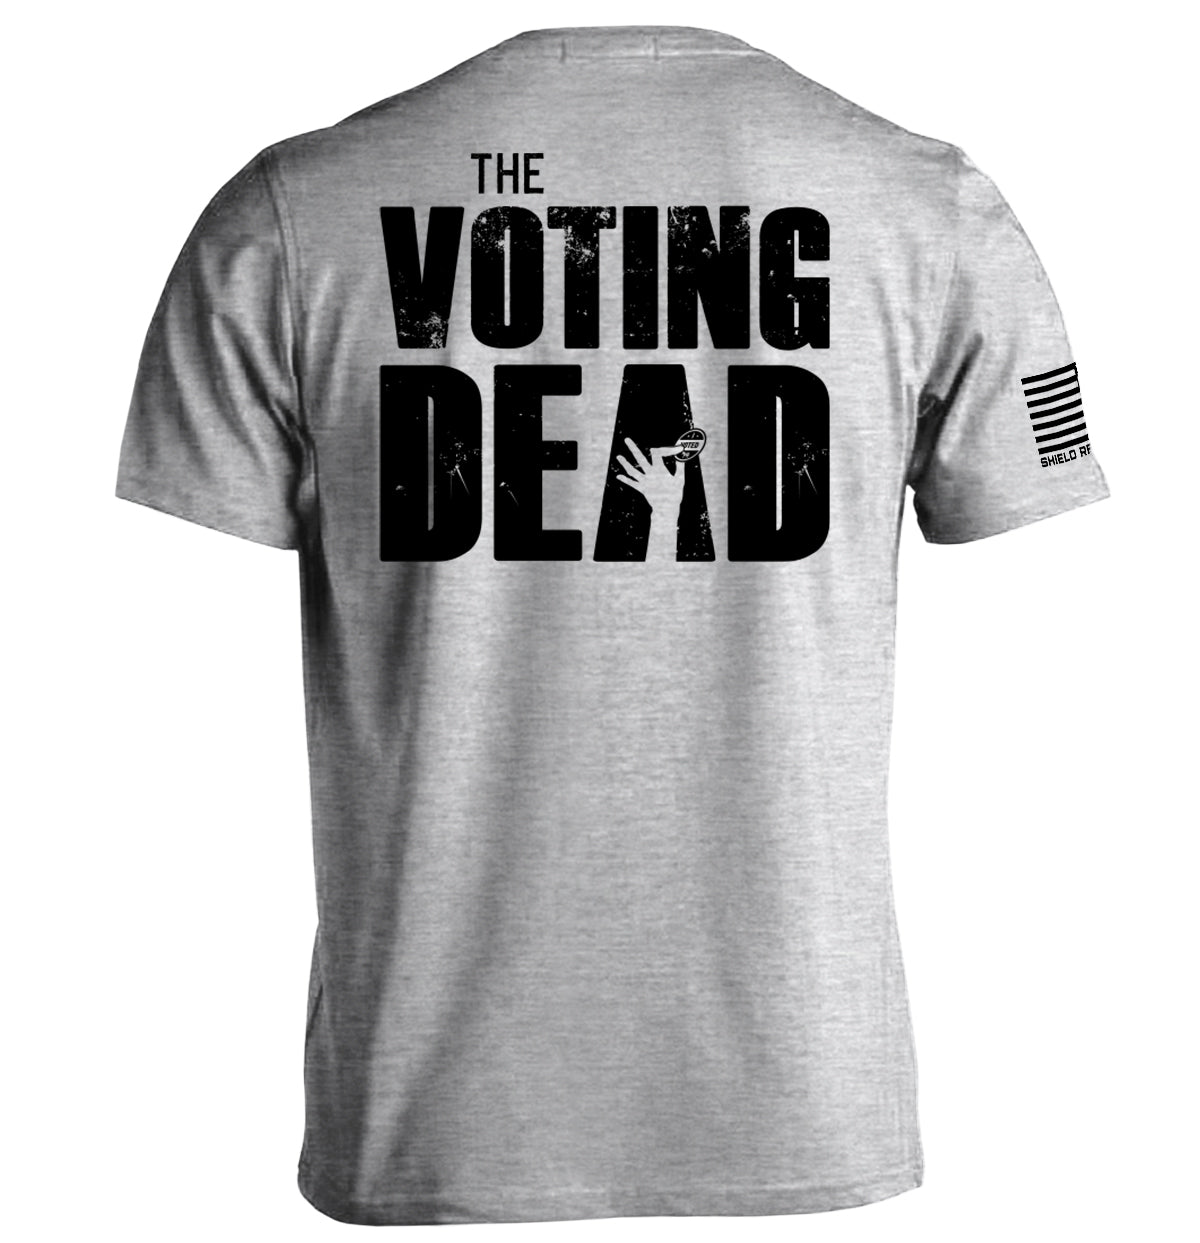 The Voting Dead